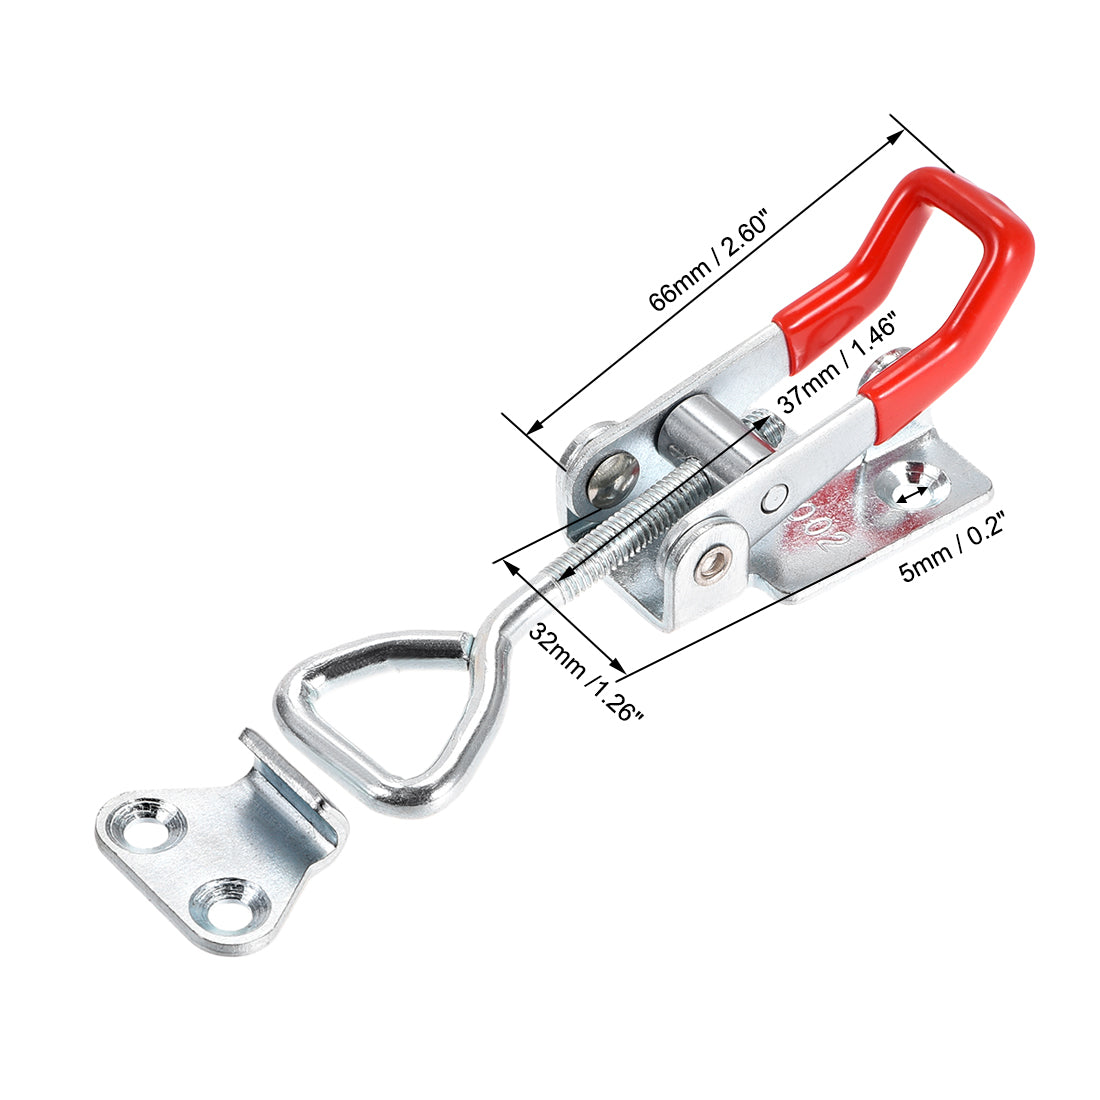 uxcell Uxcell 396lbs Holding Capacity Iron Pull-Action Latch Adjustable Toggle Clamp, 3 Pcs